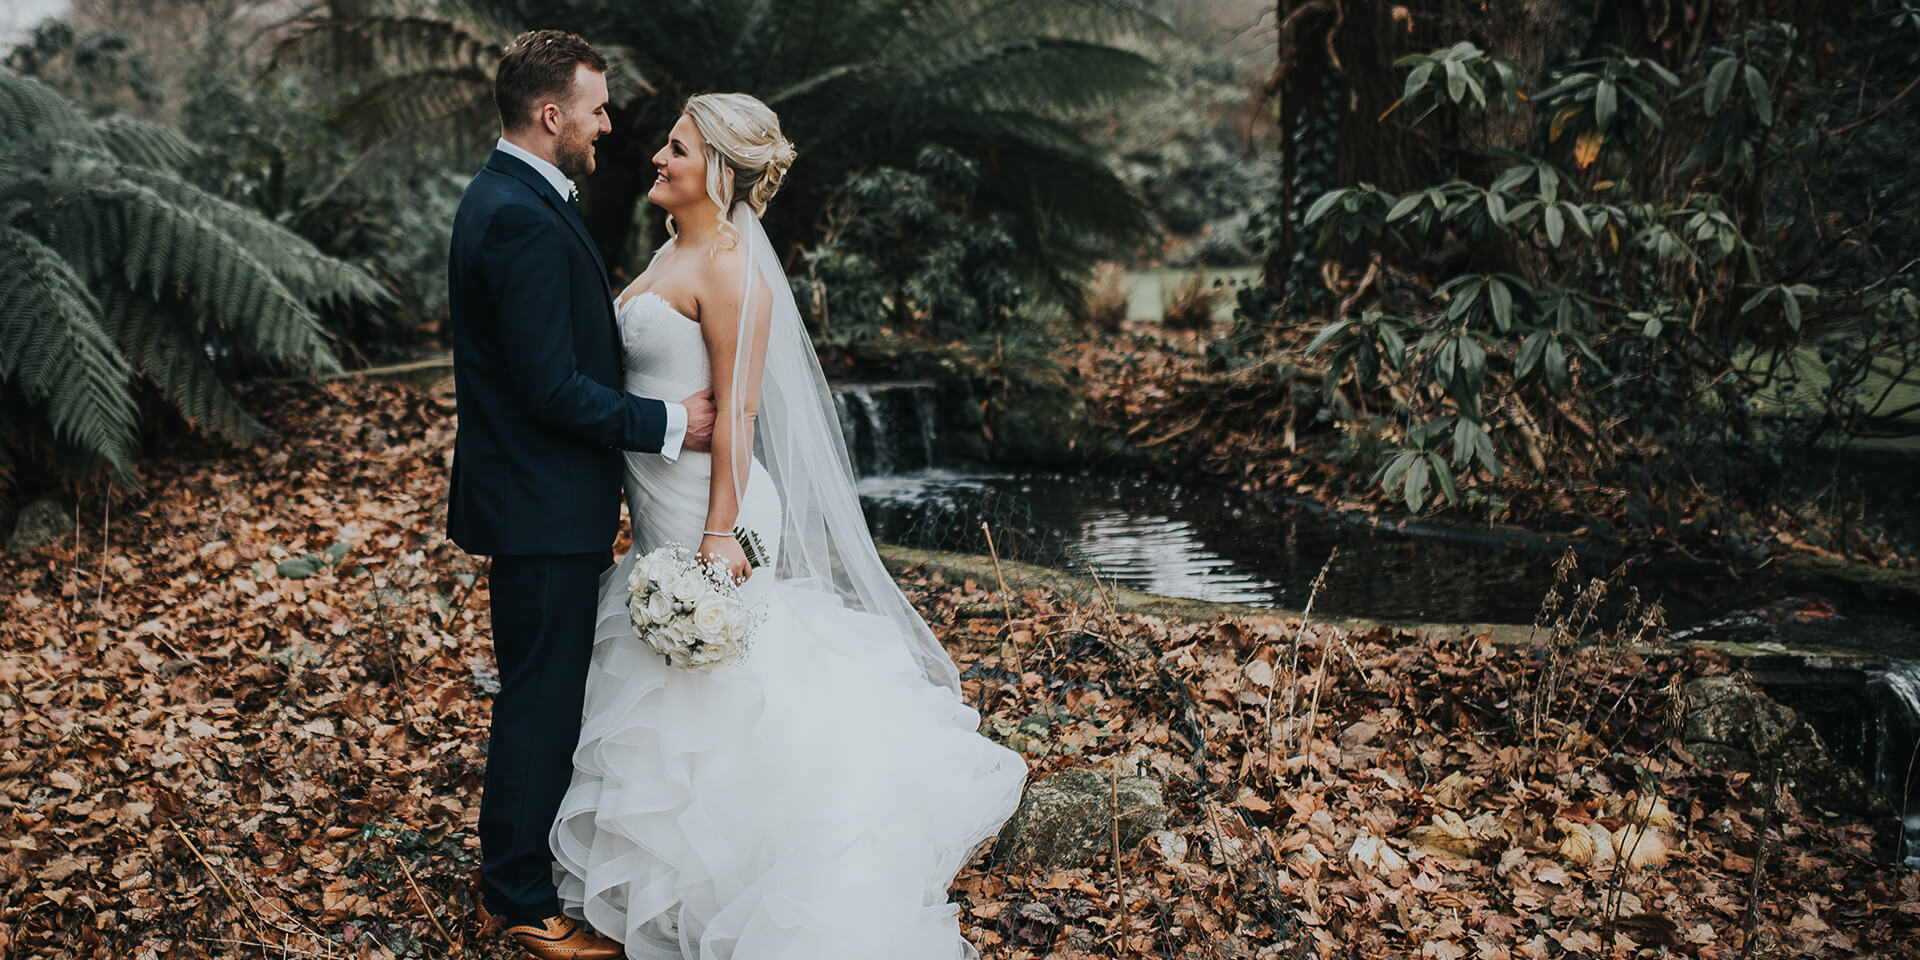 The bride and groom took a moment in the winter leaves at one of Hampshire's finest wedding venues